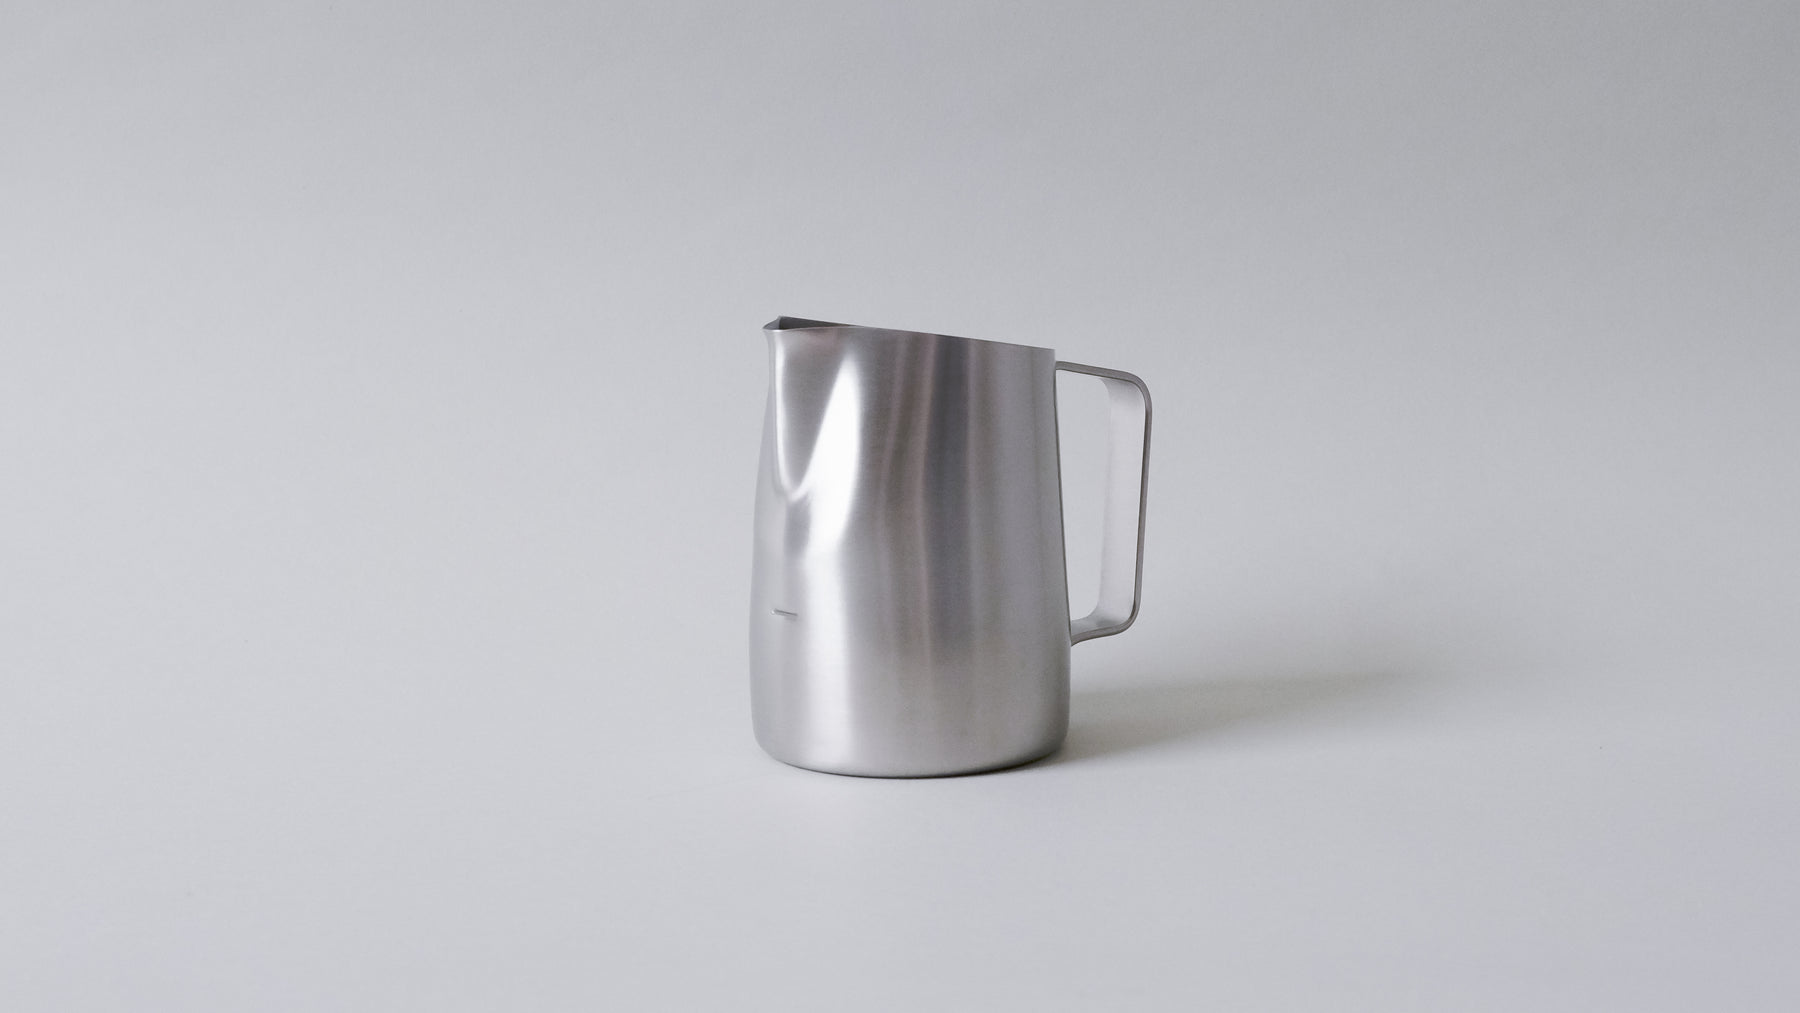 12oz Stainless Steel Milk Frothing Pitcher Gold